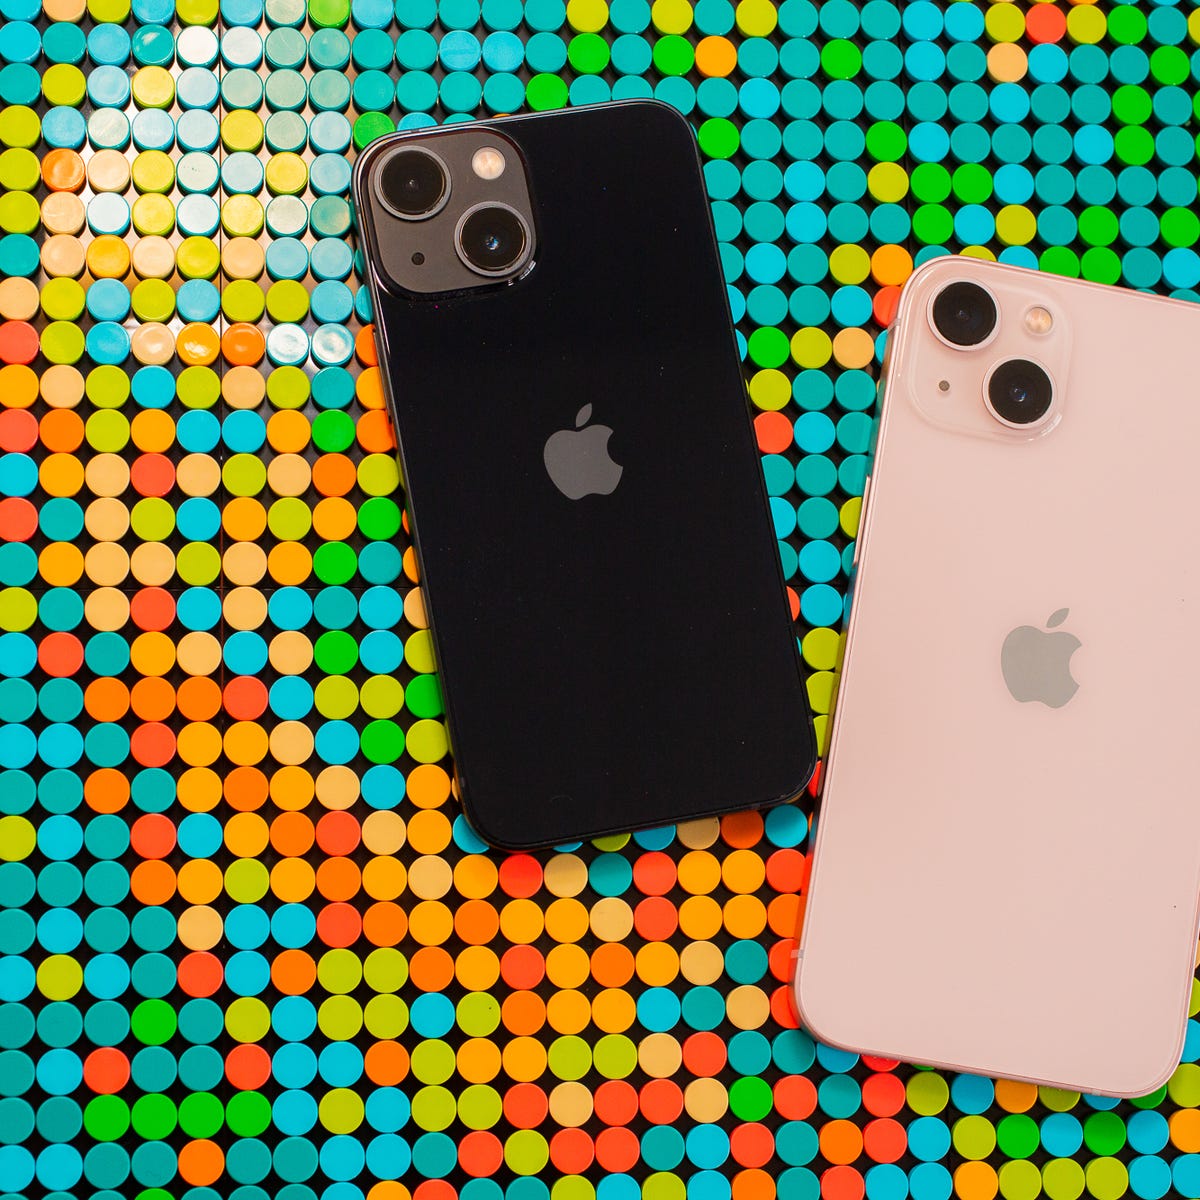 iPhone 13 vs. iPhone 12: Which One Is Right for You in 2023? - CNET